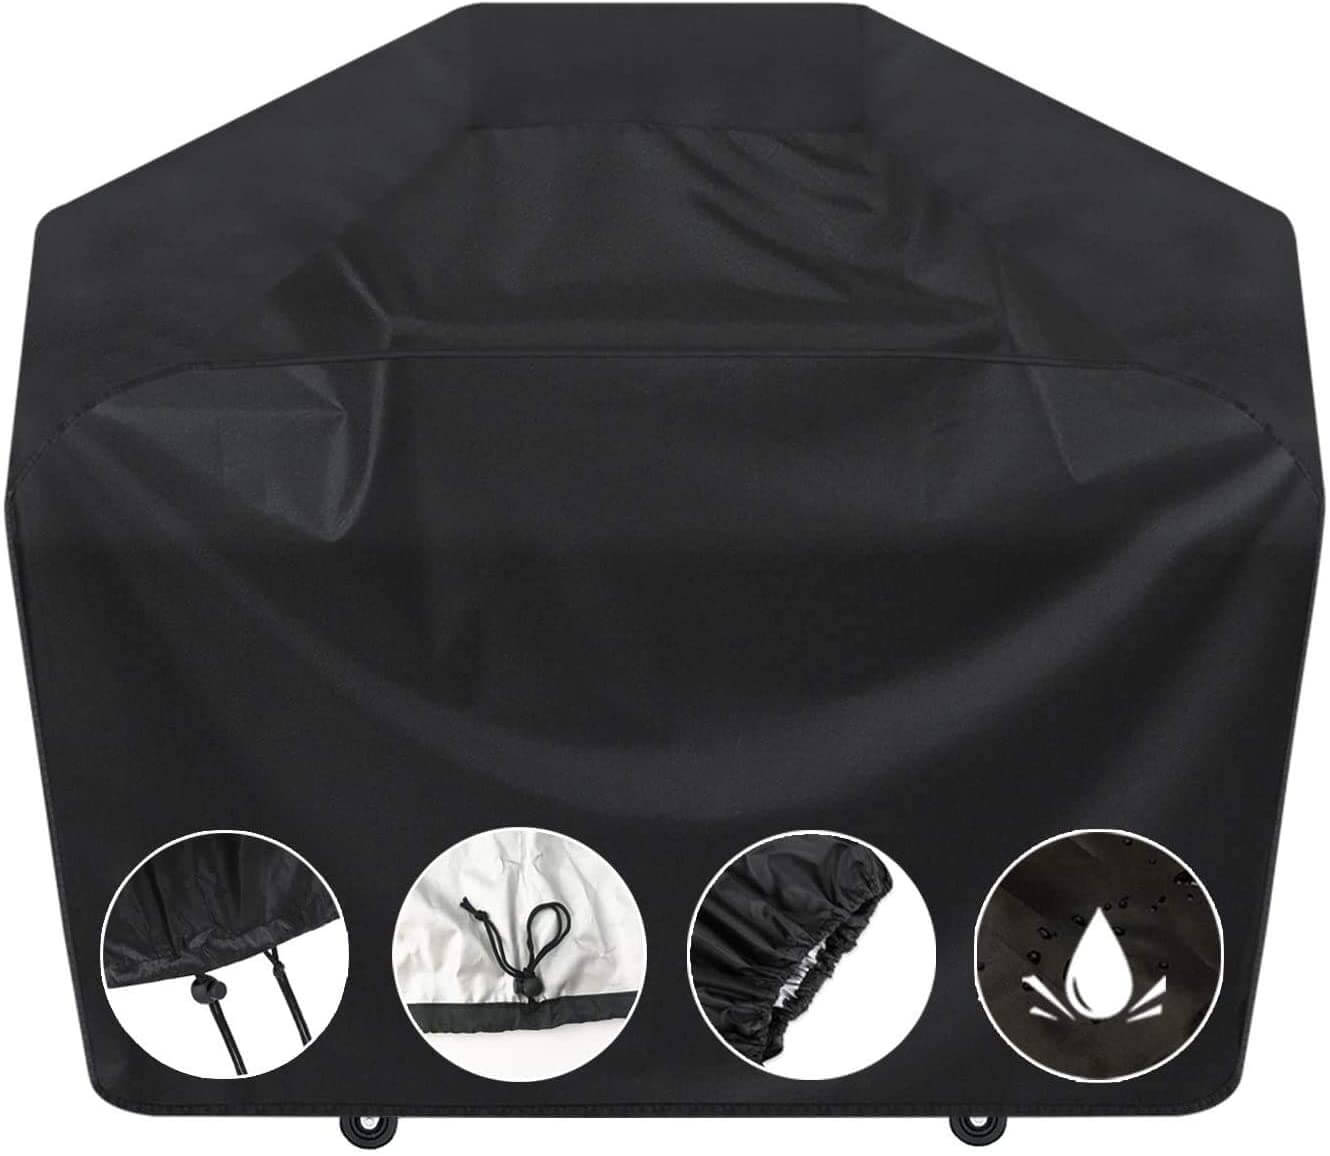 SARCCH Grill Cover